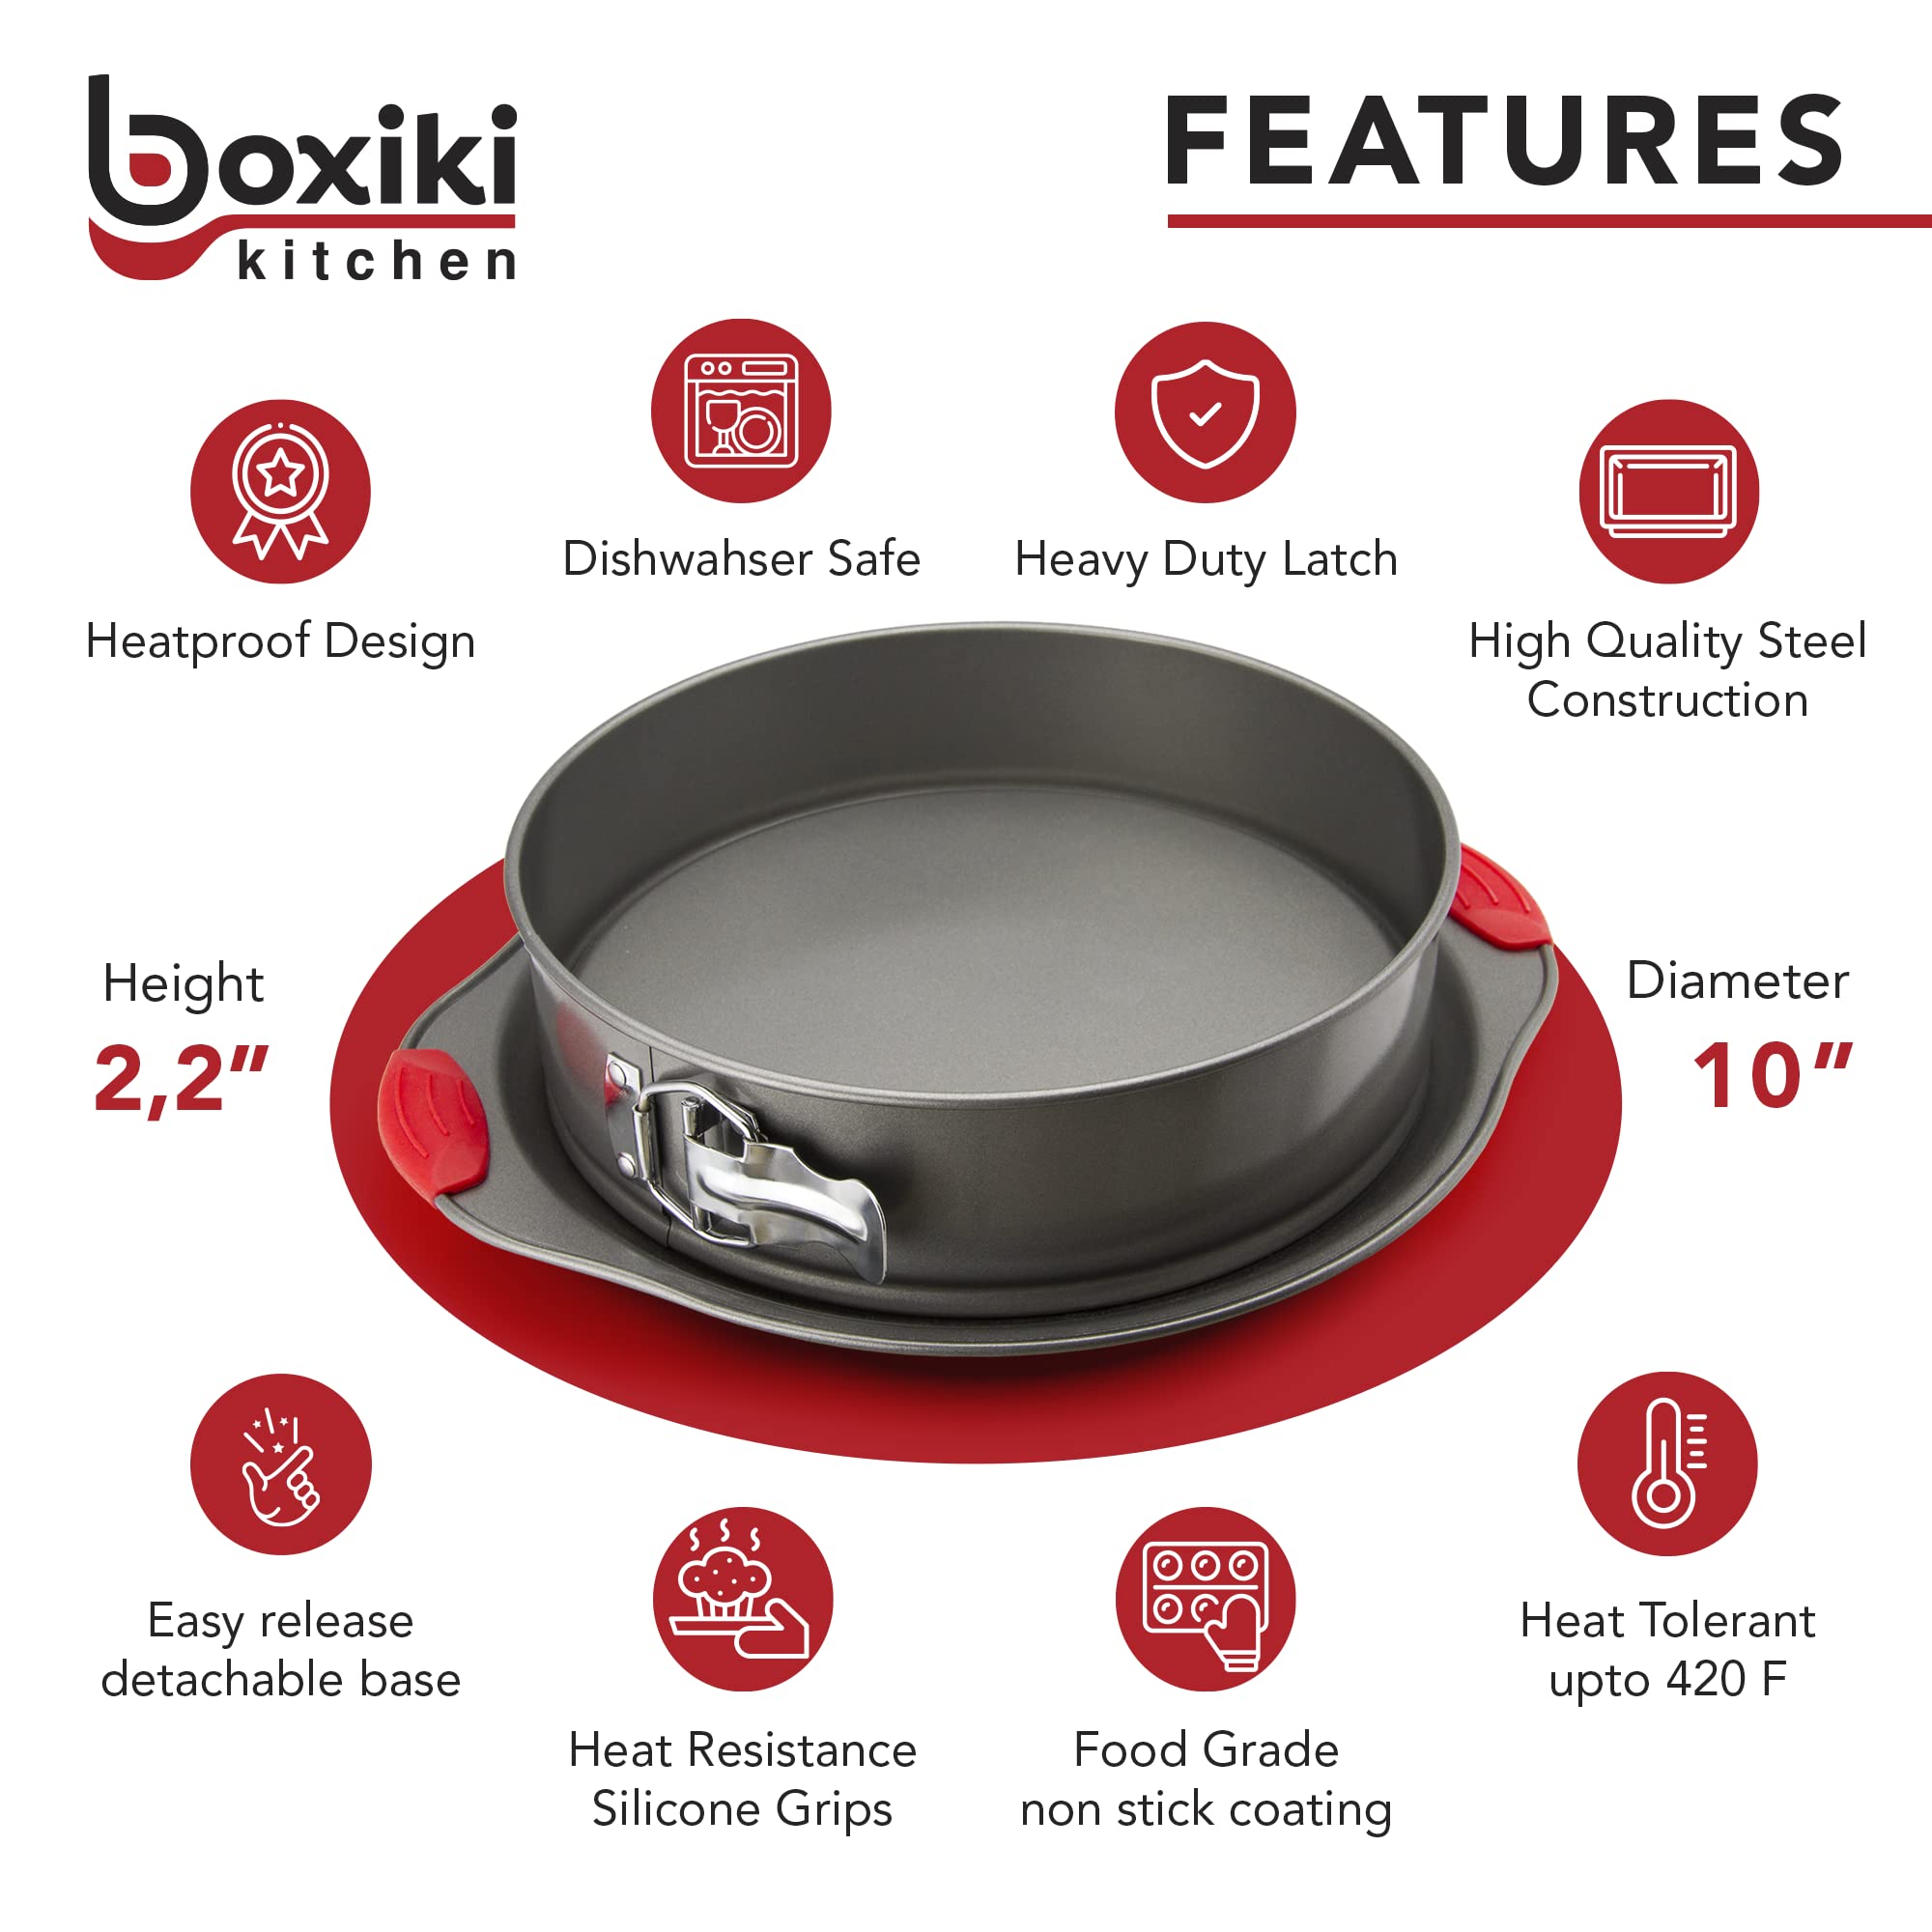 Boxiki Kitchen 10 Inch Nonstick Springform Pan & 11x14 Inch Cookie Sheet Pan - Professional Spring Form and Cheesecake Baking Mold with Heavy Gauge Steel Oven Baking Sheet